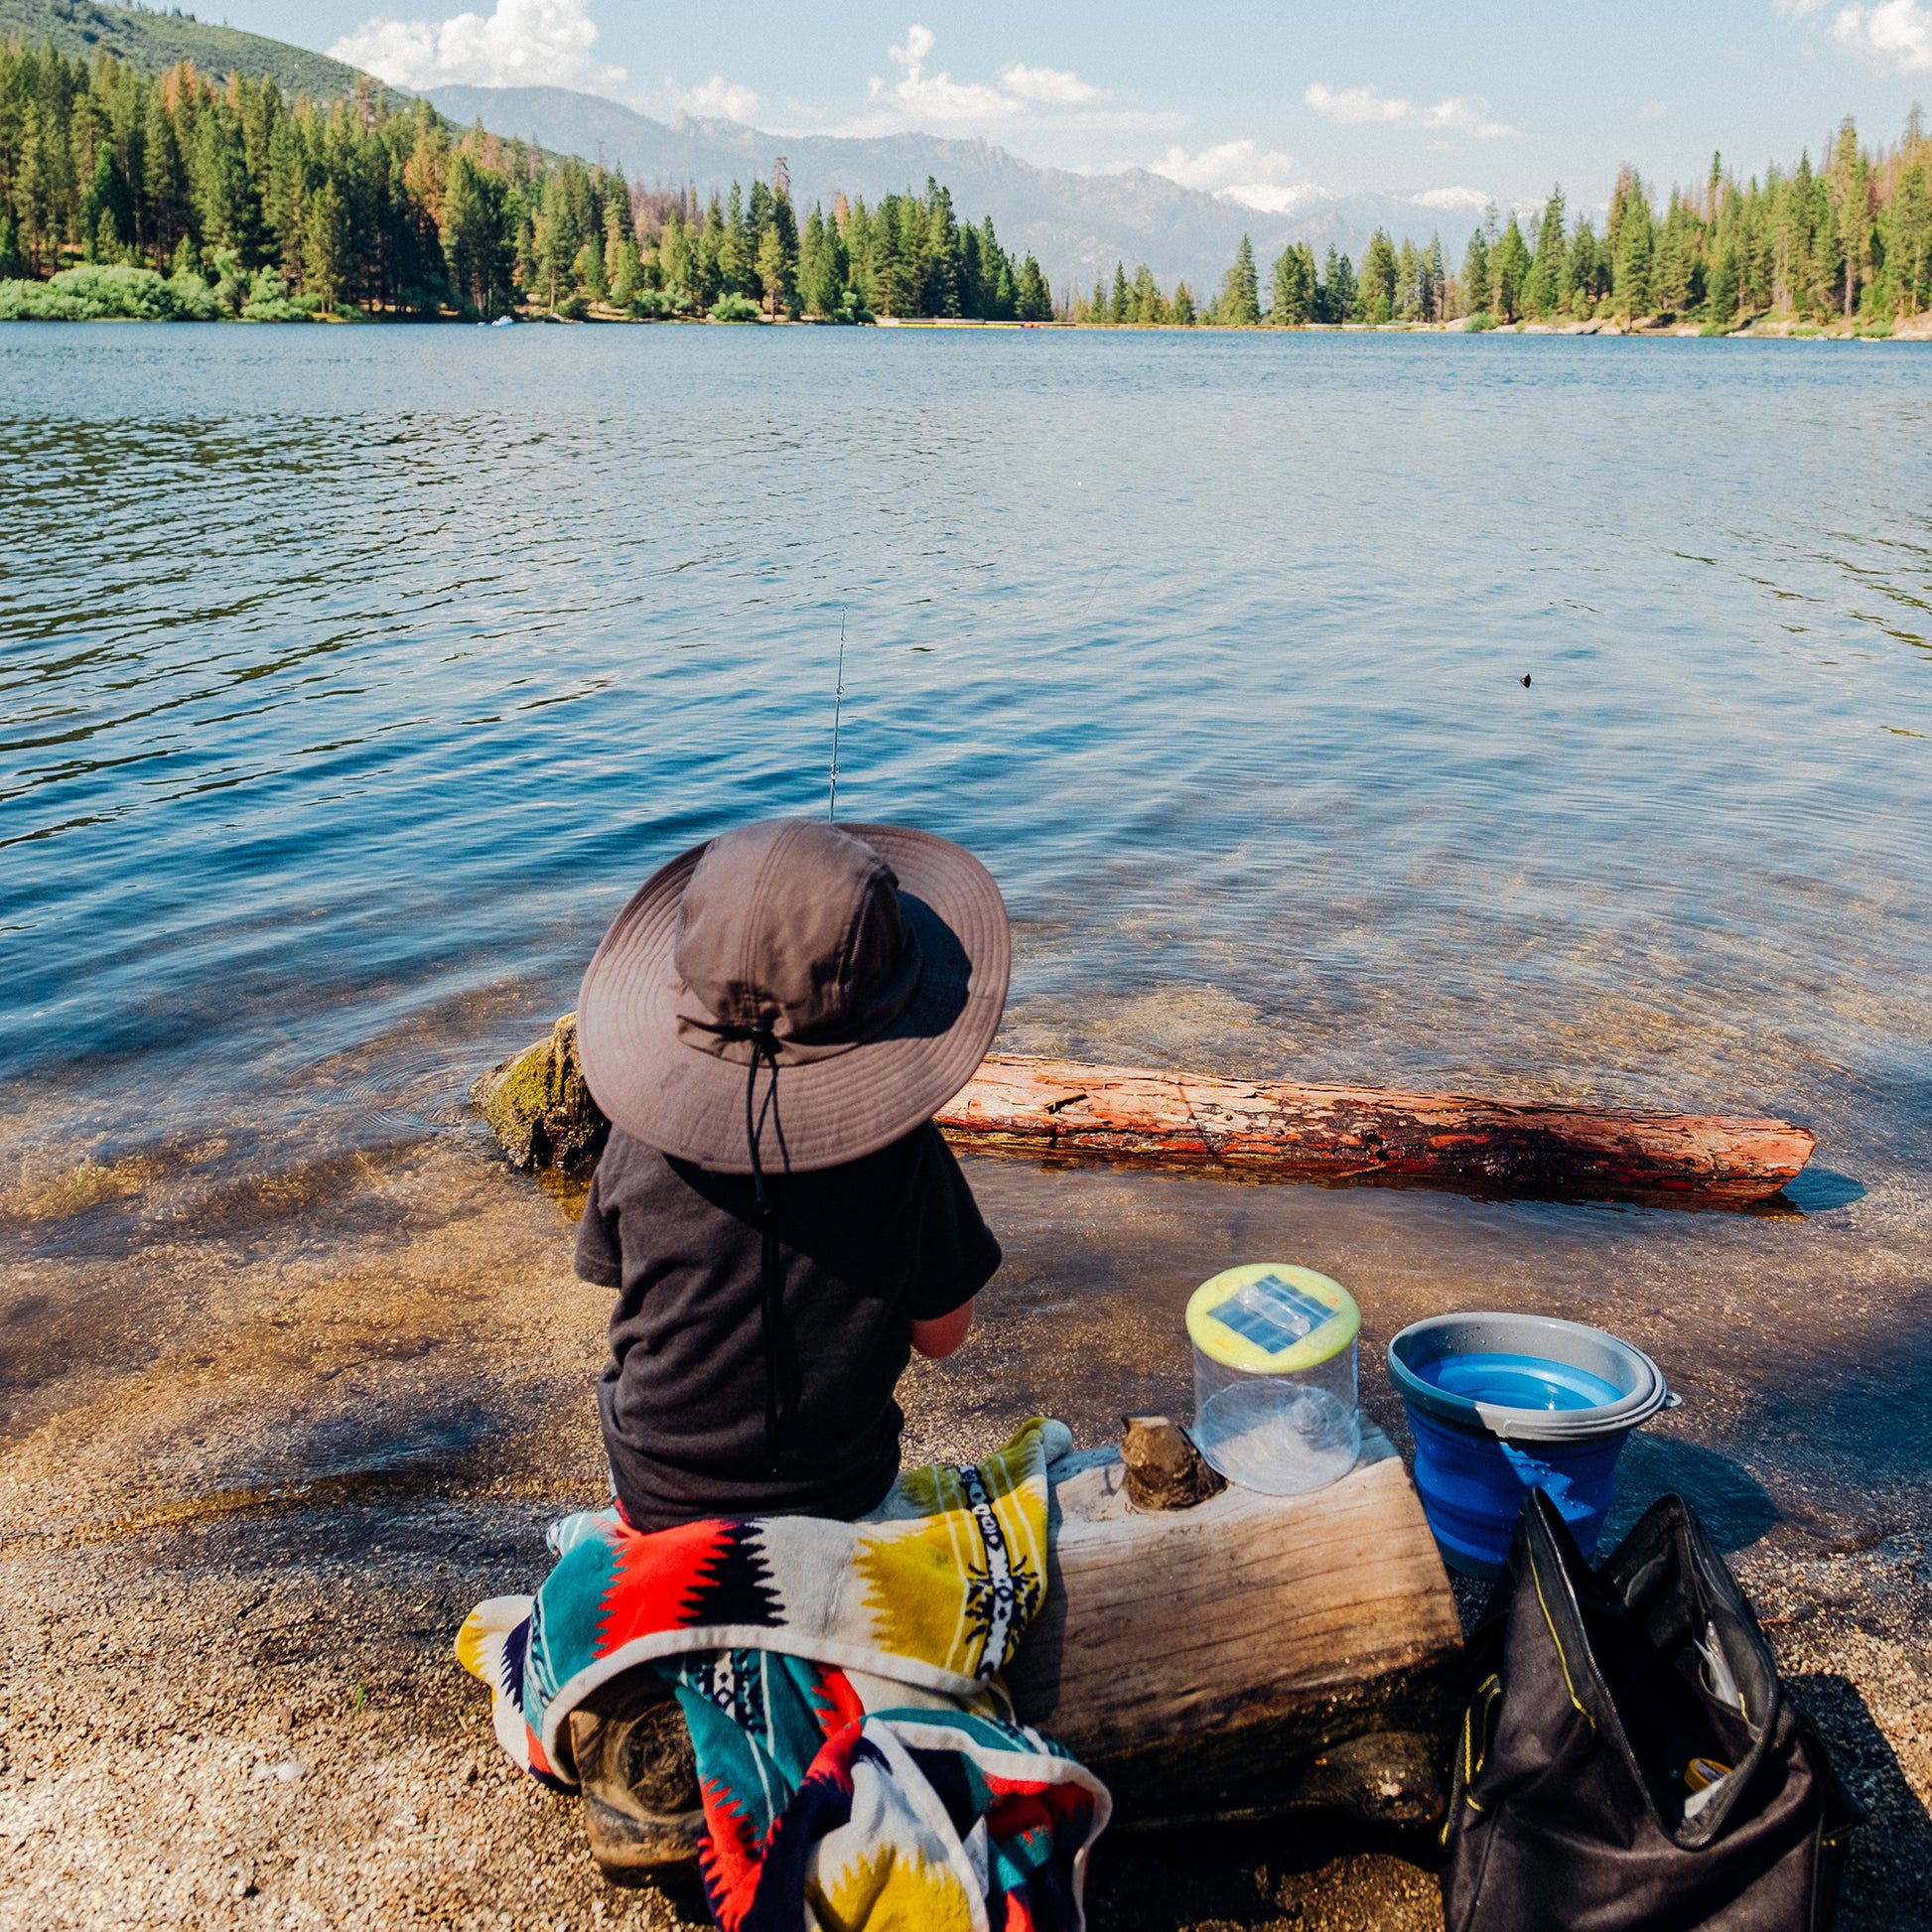 Child sitting on log next to a scenic lake surrounded by mountains and trees. On the log, there are a blanket, bucket, bag, and rechargeable Luci solar light.